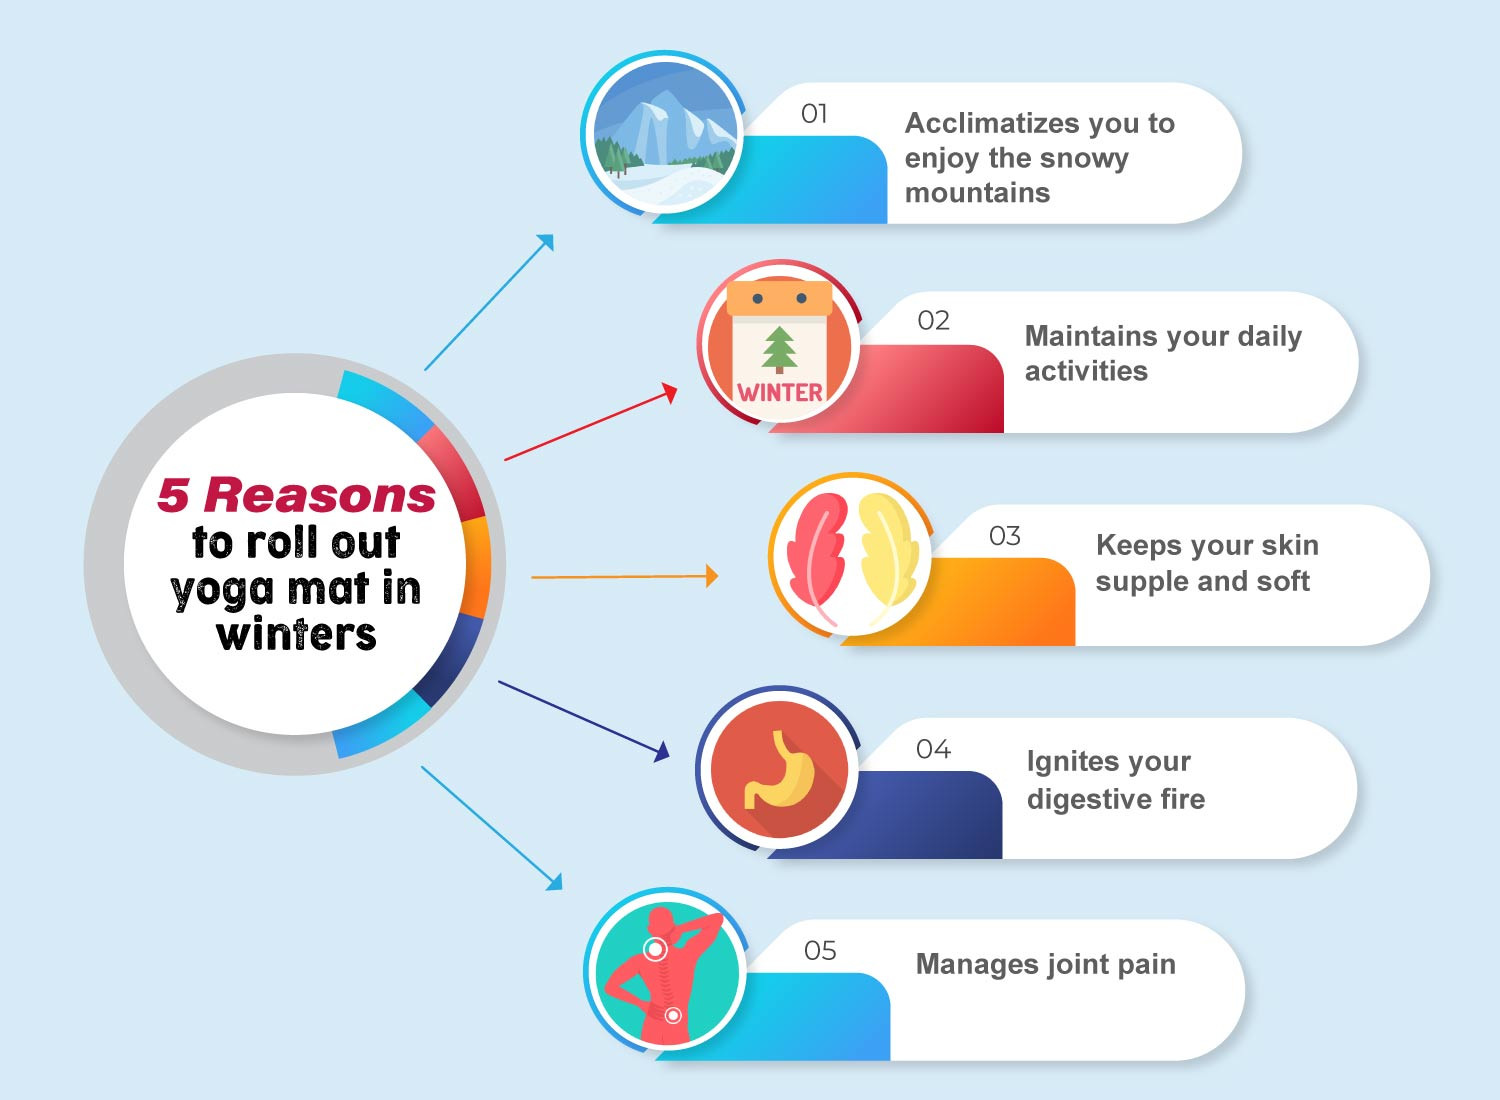 Infographic 5 Reasons to roll out yoga mat during winters.jpg